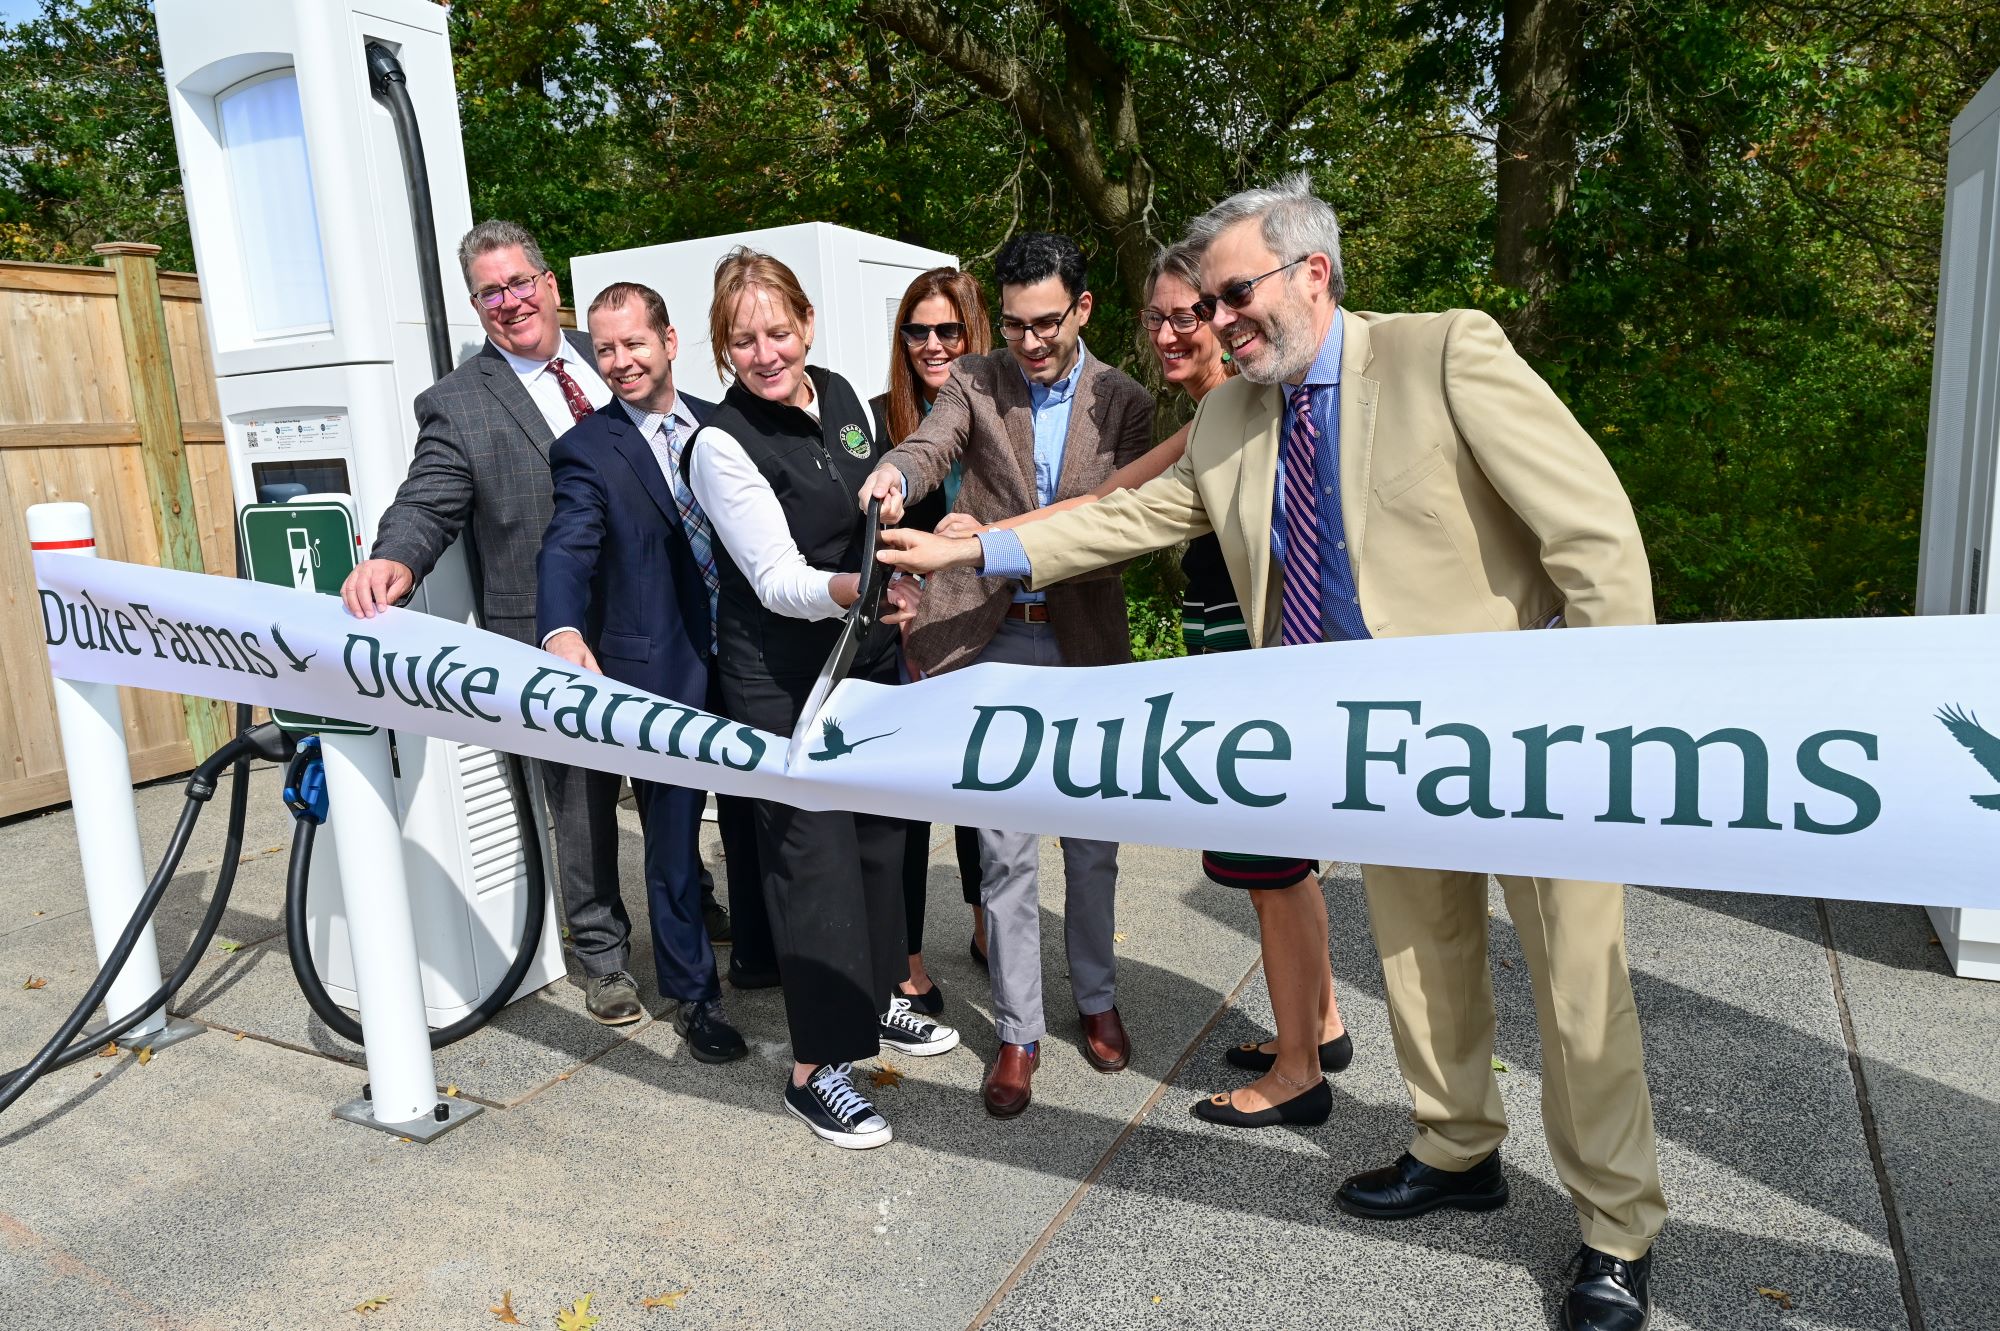 Duke Farms Unveils New Jersey’s First Electric Vehicle Fast Charging Station Powered by Electricity From On-Site Solar, Demonstrating Leadership in the Transition to Clean Transportation